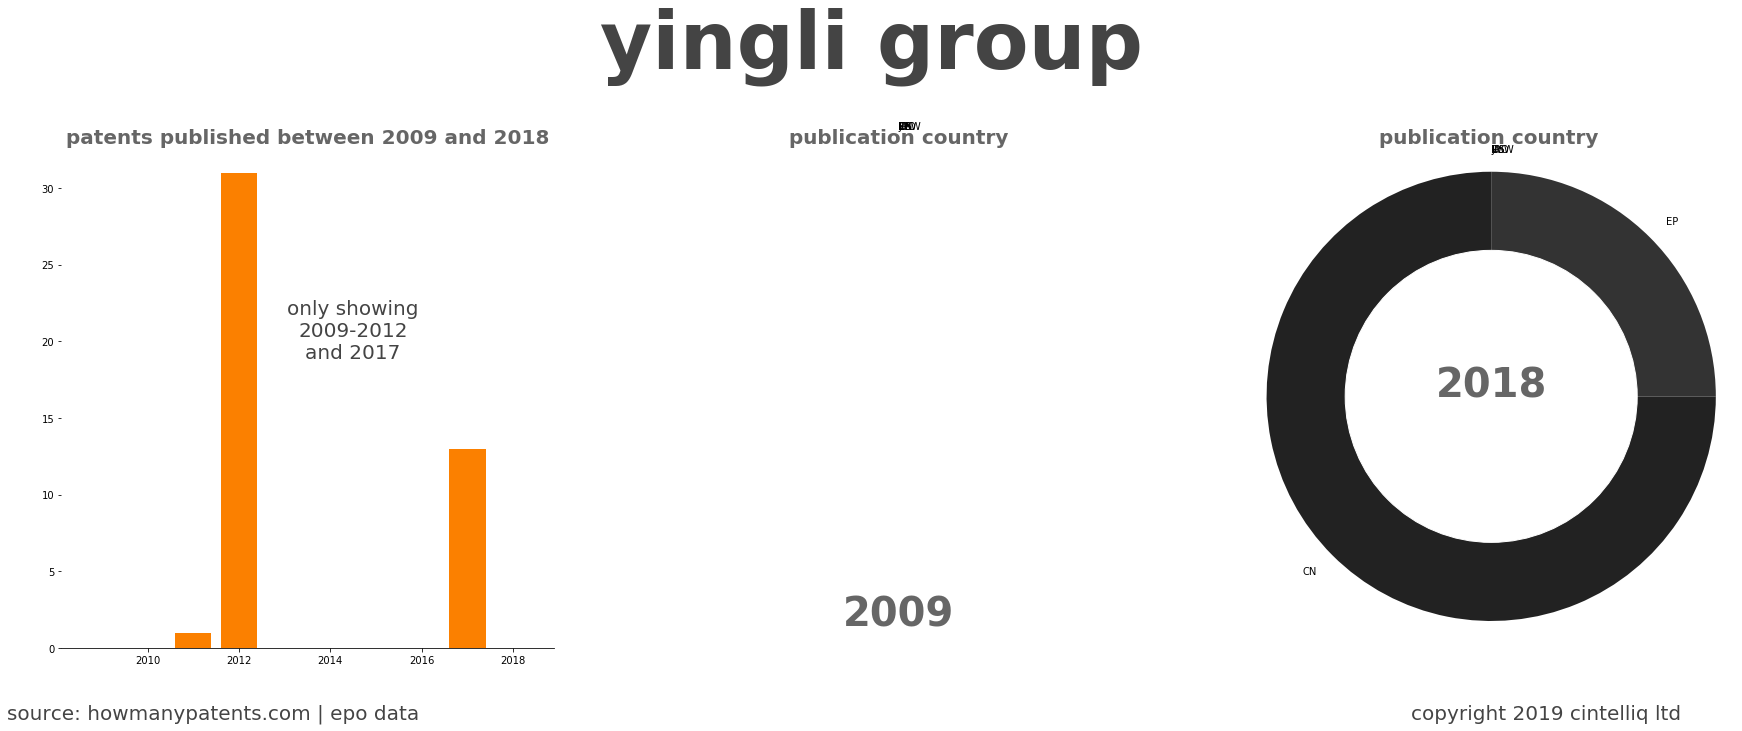 summary of patents for Yingli Group